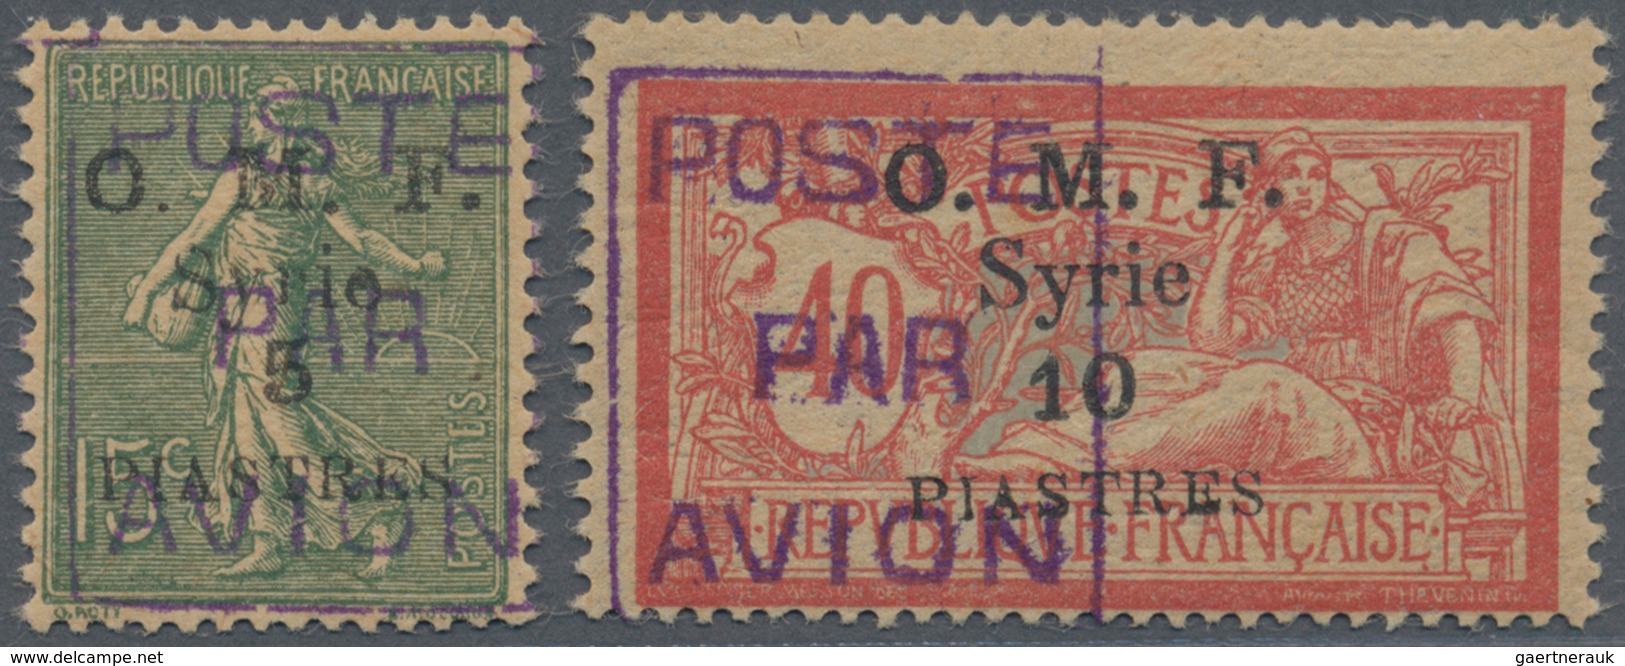 09835 Syrien: 1920, Airmails, 5pi. On 15c. Semeuse And 10pi. On 40c. Merson, Fresh Colours, Well Perforate - Syrie